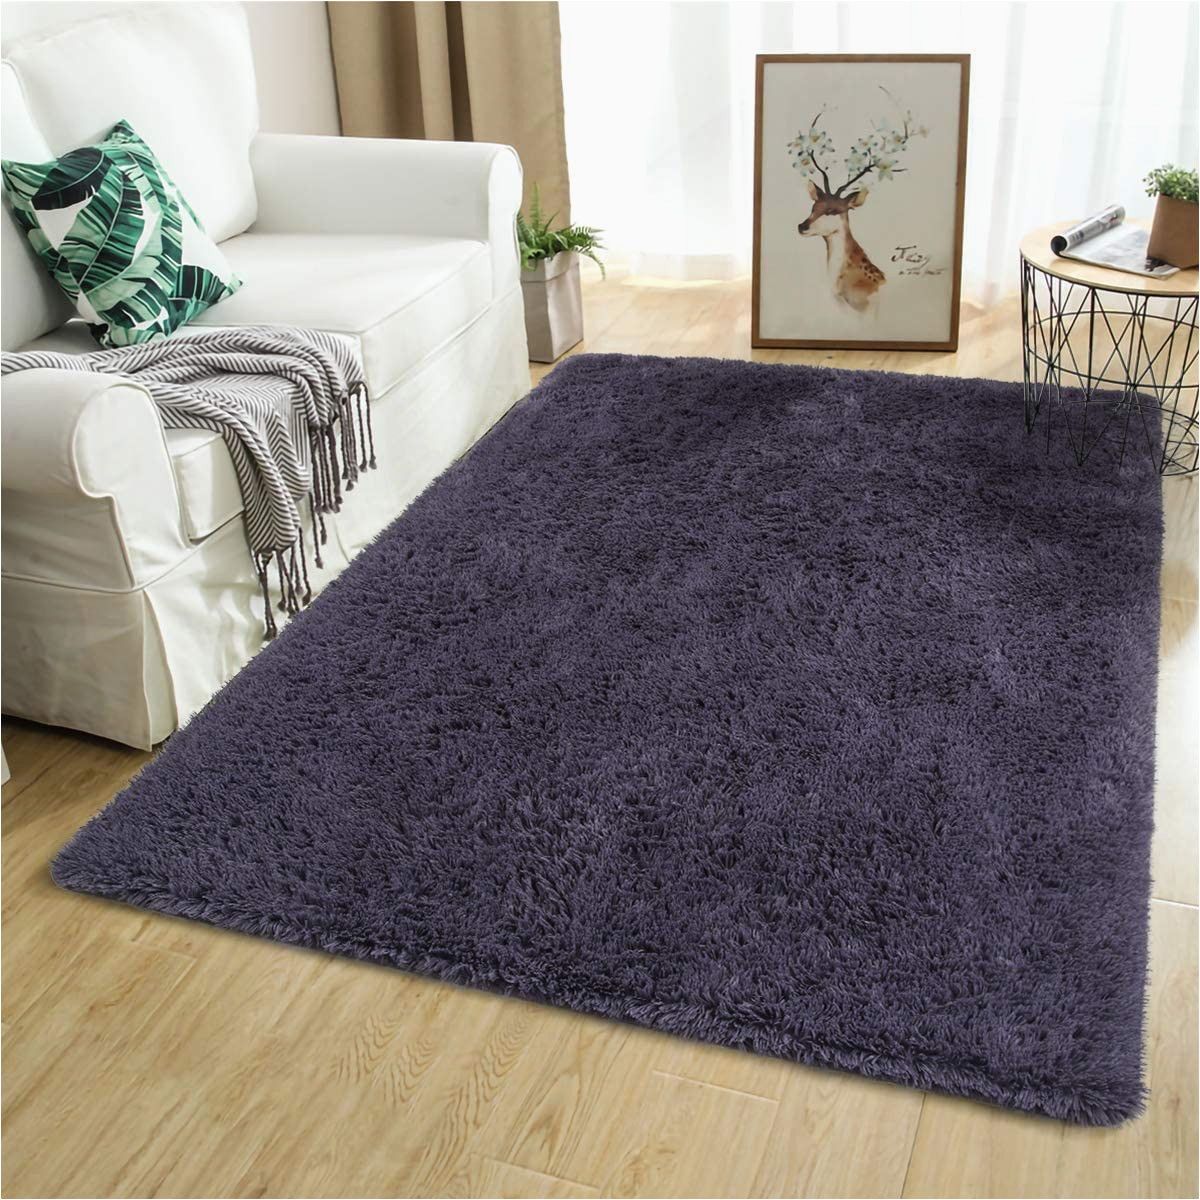 Does Floor and Decor Sell area Rugs Floor Shaggy 7.6 X 5.3 Bedroom for Rugs area Fluffy softlife Rug …